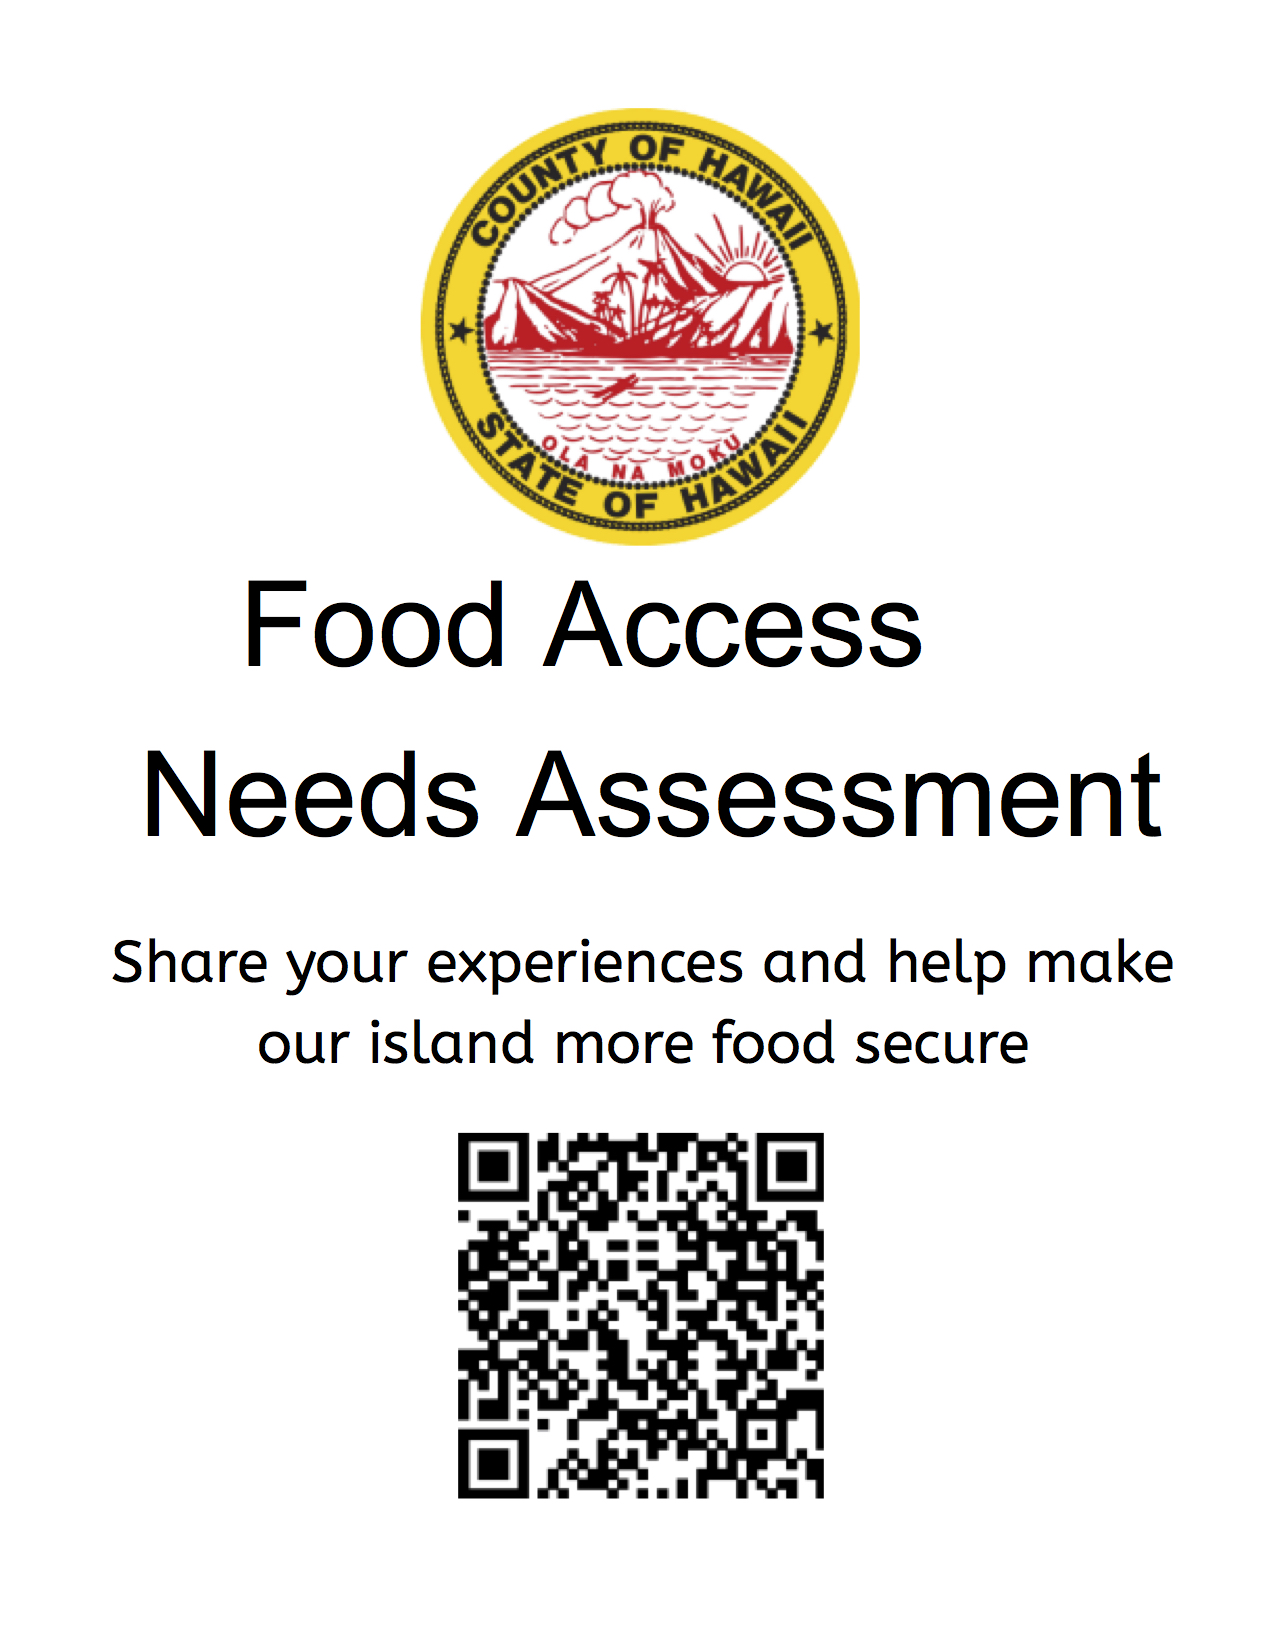 Help us understand and strengthen our food security on Hawaii Island